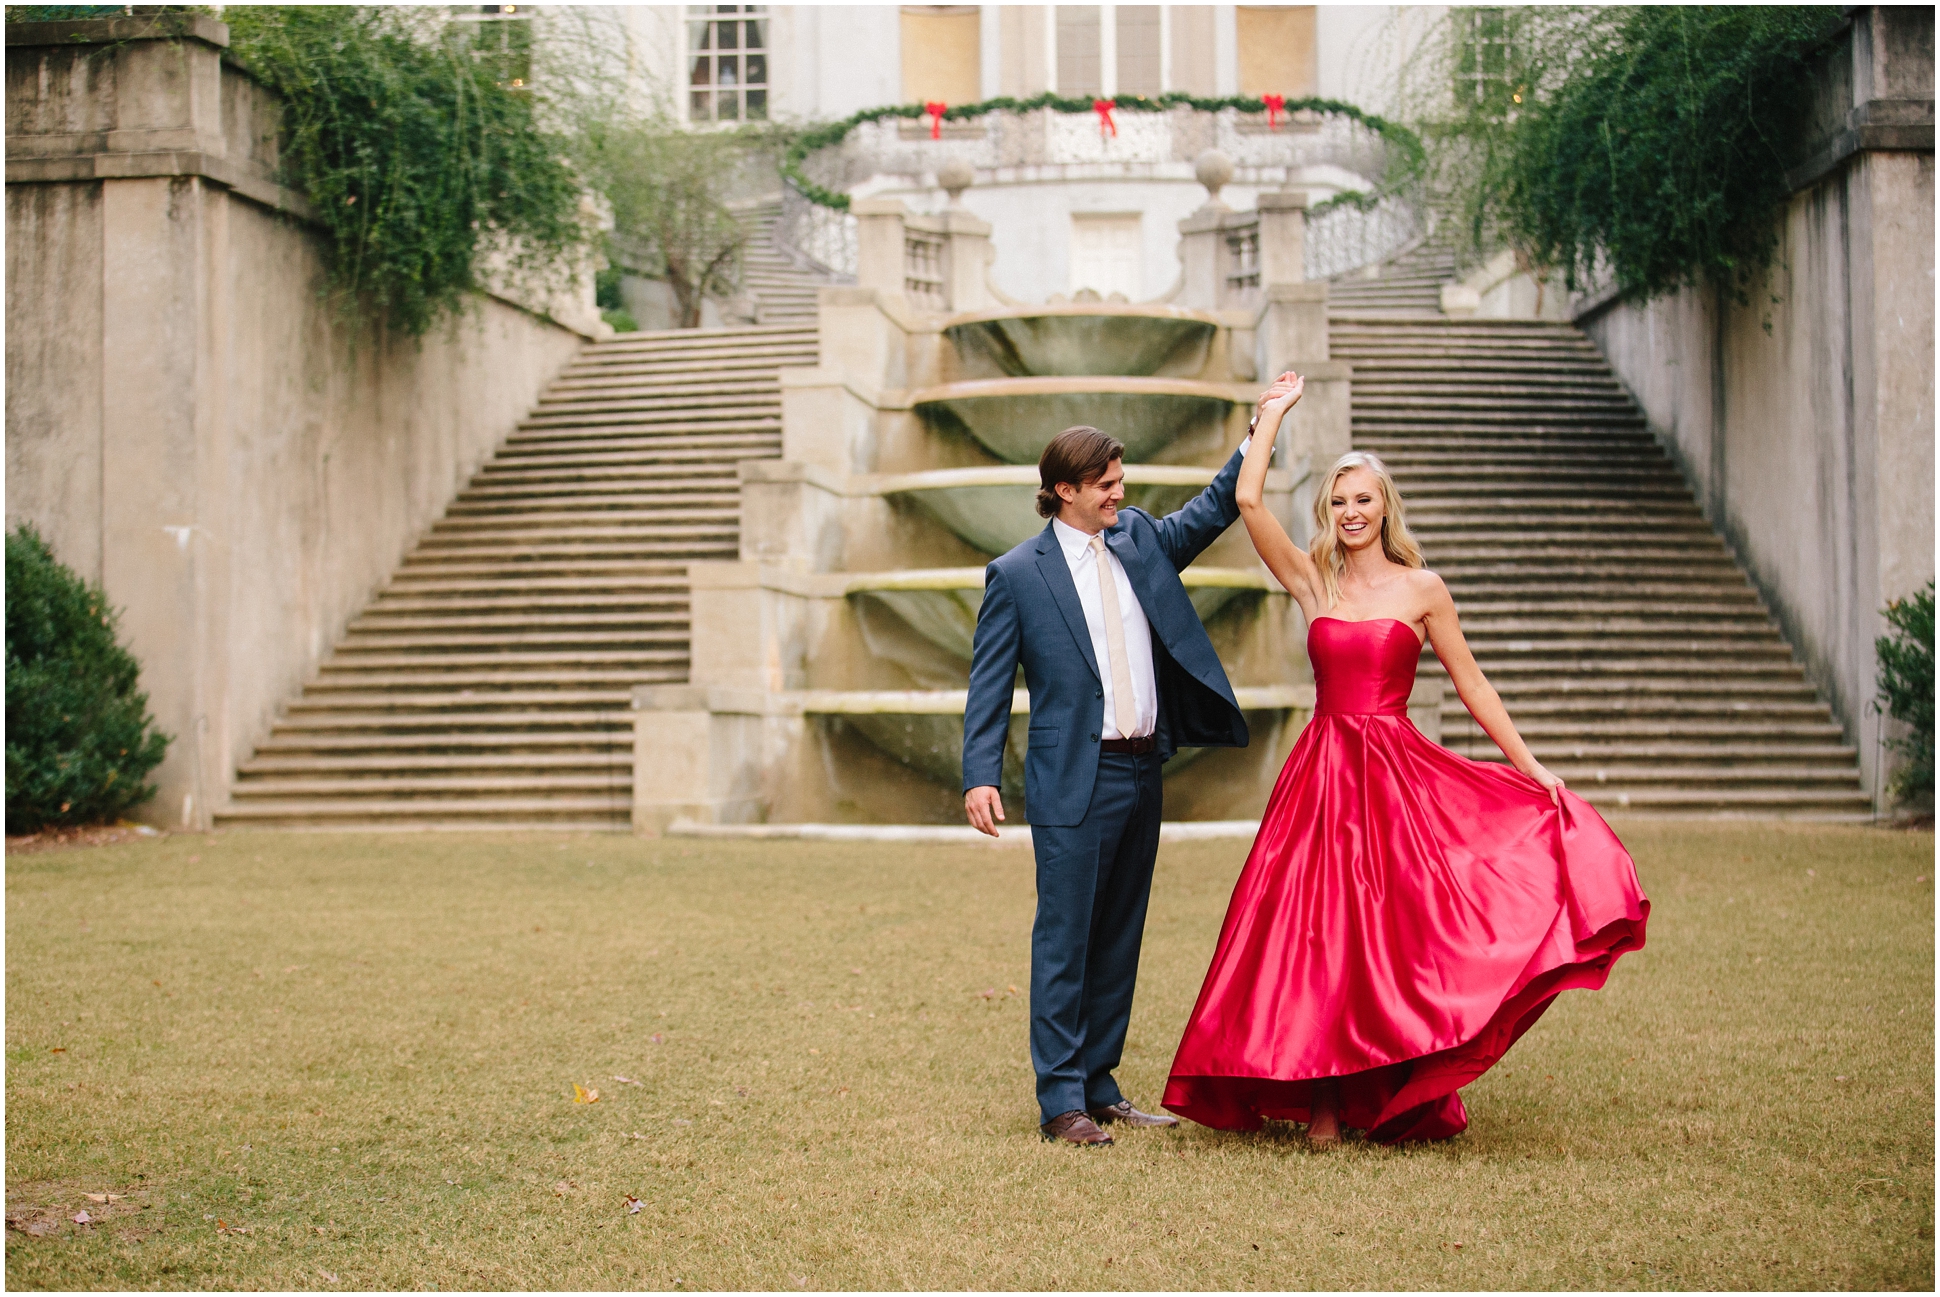 Swan House-Atlanta Historical Center Engagement Session | Two Chics Photography | www.twochicsphotography.com